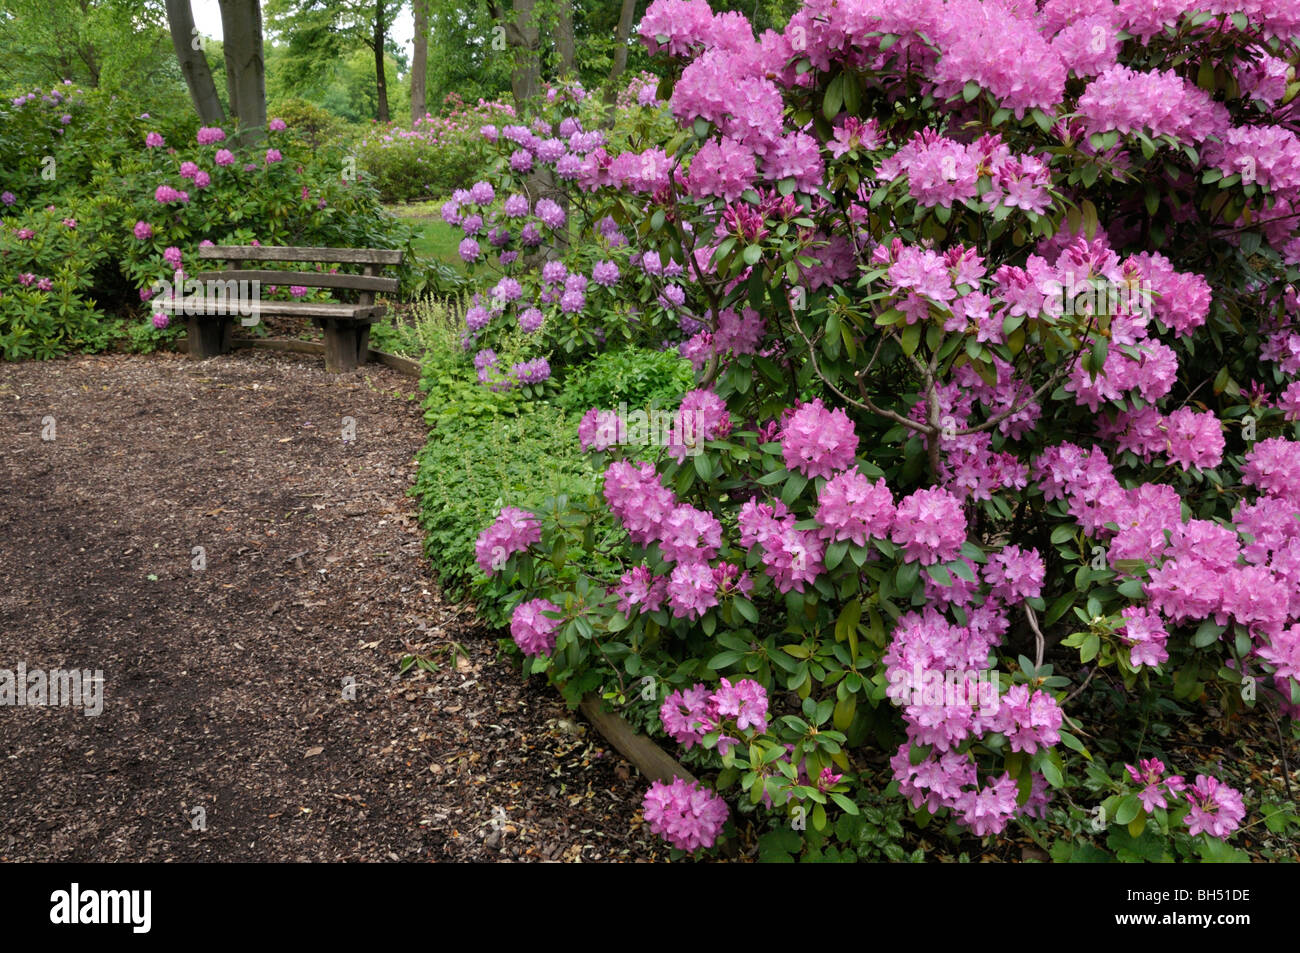 Rhododendrons (Rhododendron) Stock Photo